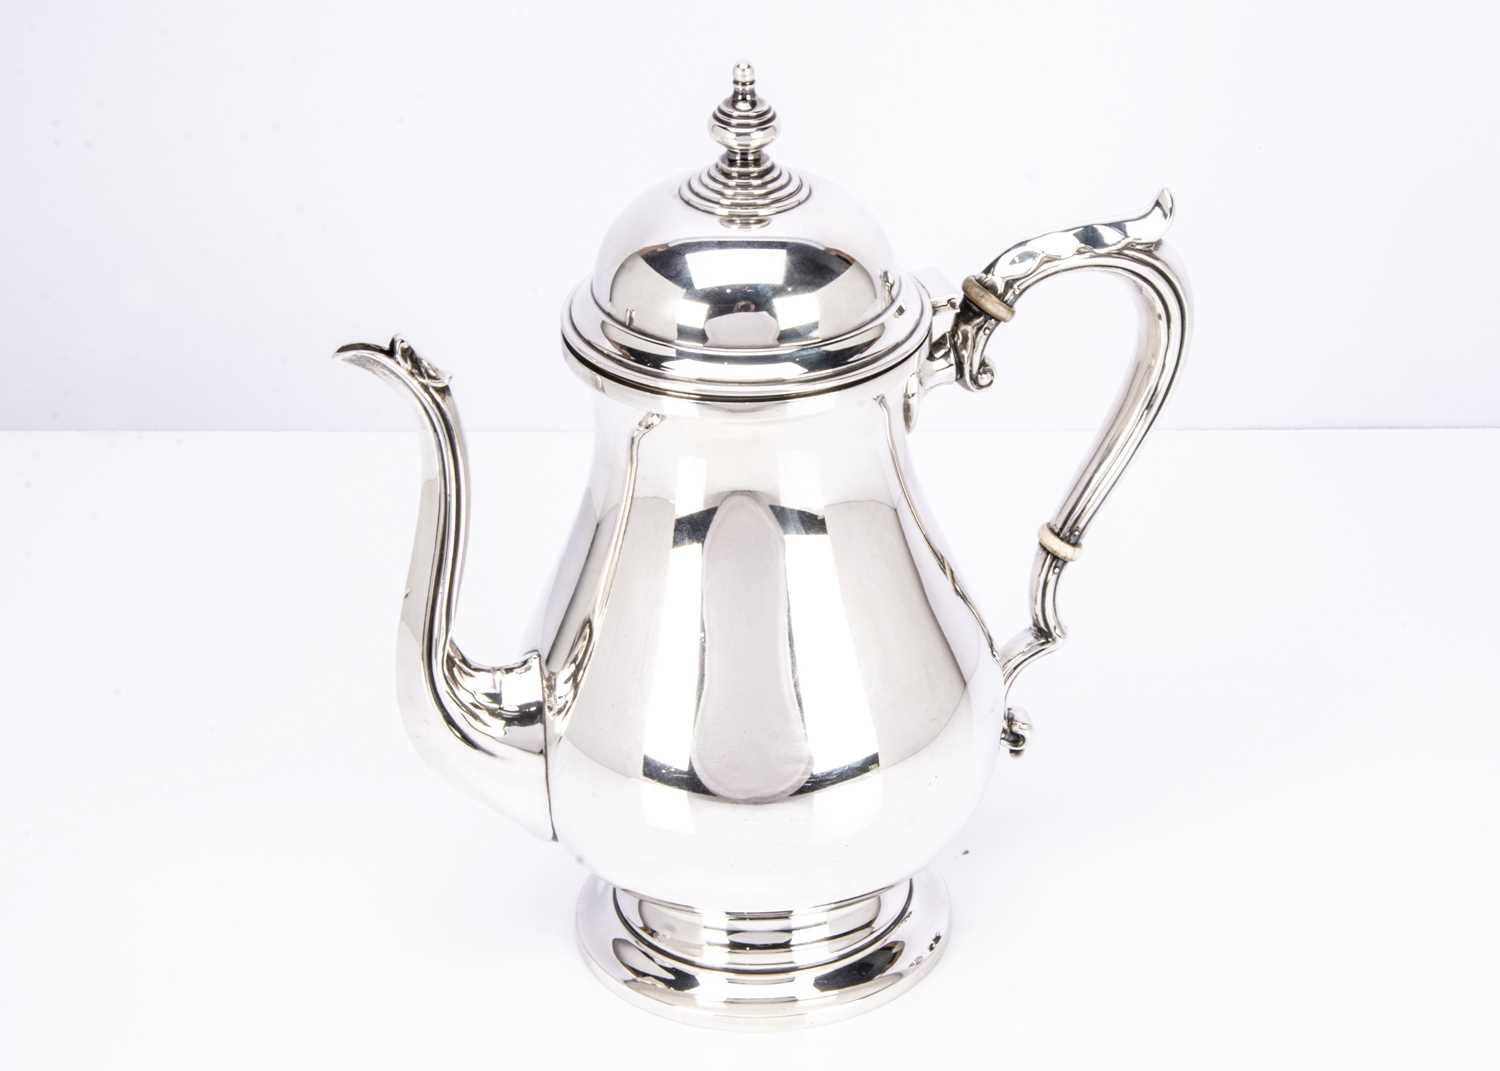 An Art Deco period American coffee pot by Fisher,